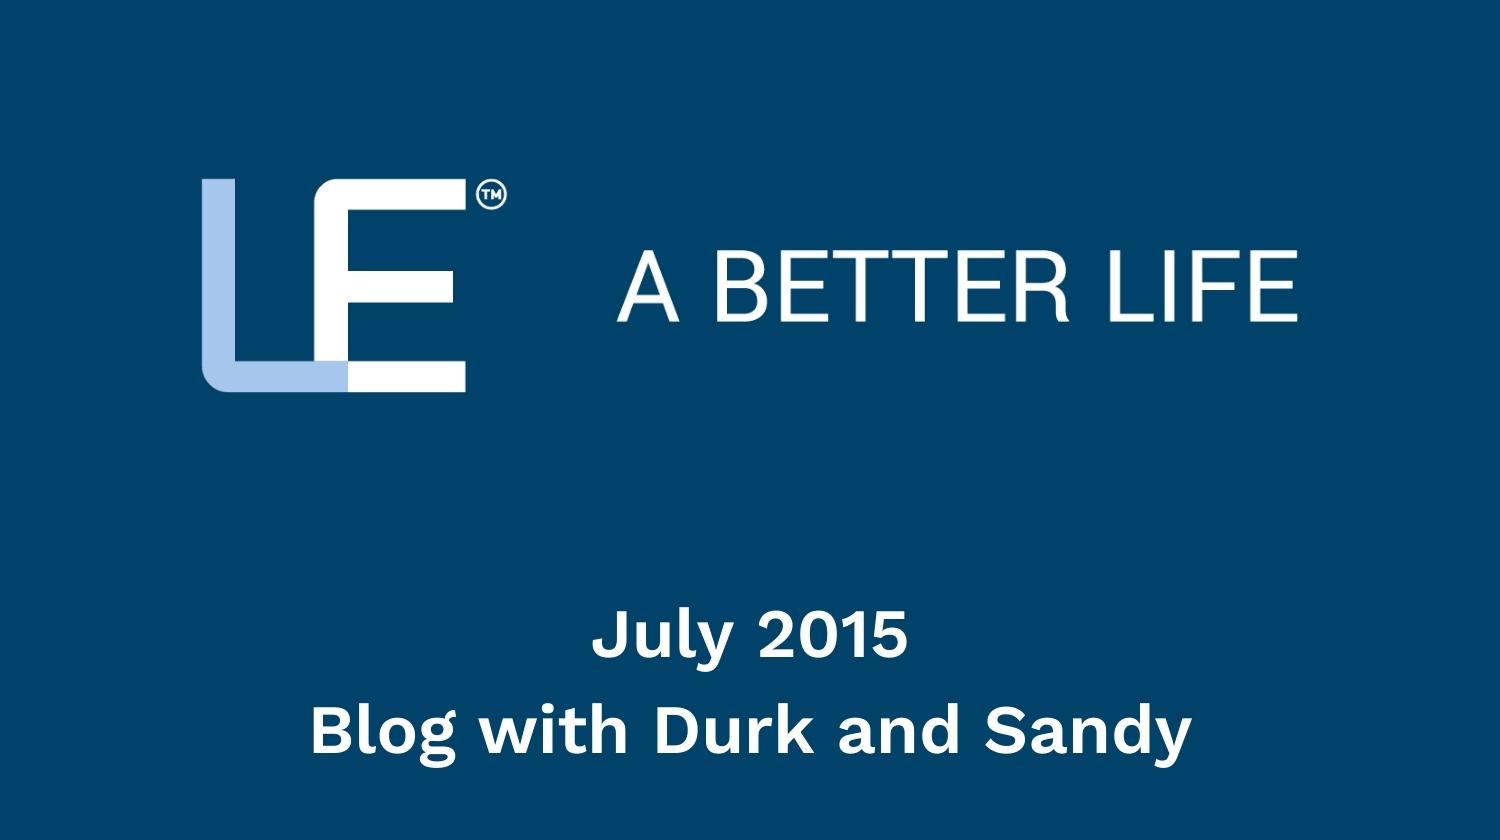 July 2015 Blog with Durk and Sandy